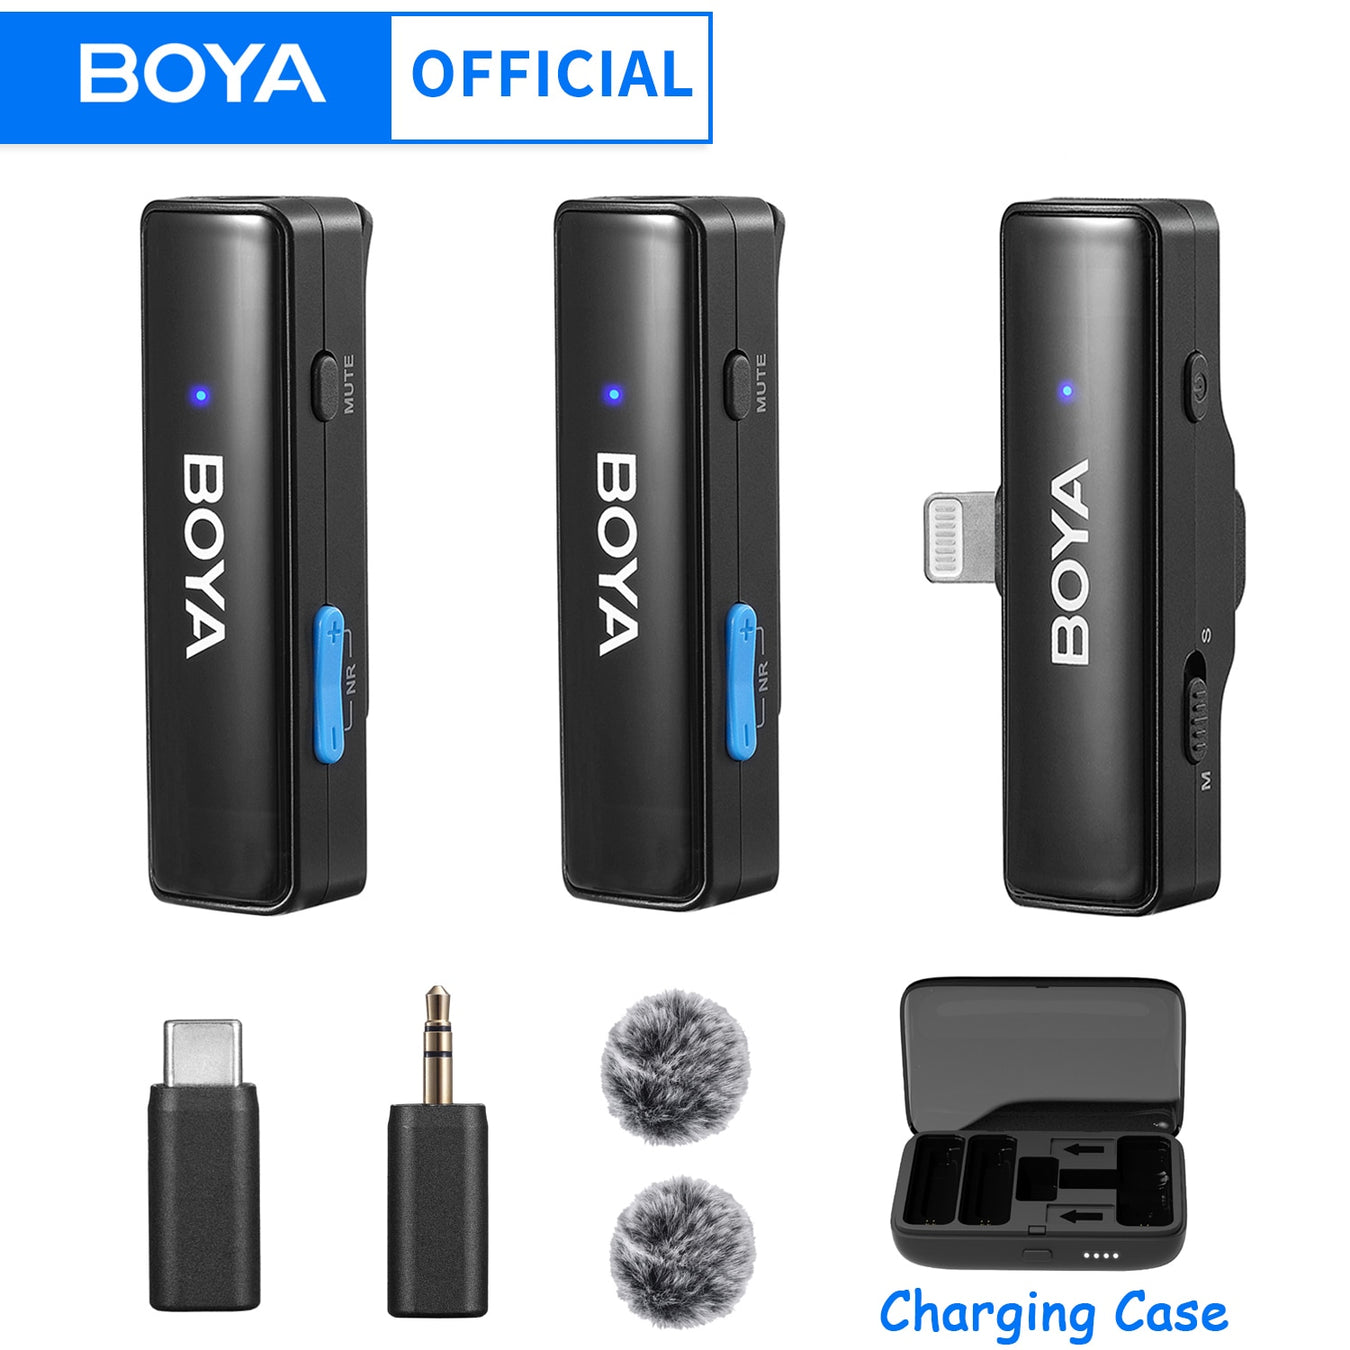 BOYA BOYALINK Wireless Lavalier Lapel Microphone for iPhone Android DSLR Camera Youtube Live Streaming Audio Recording Interview